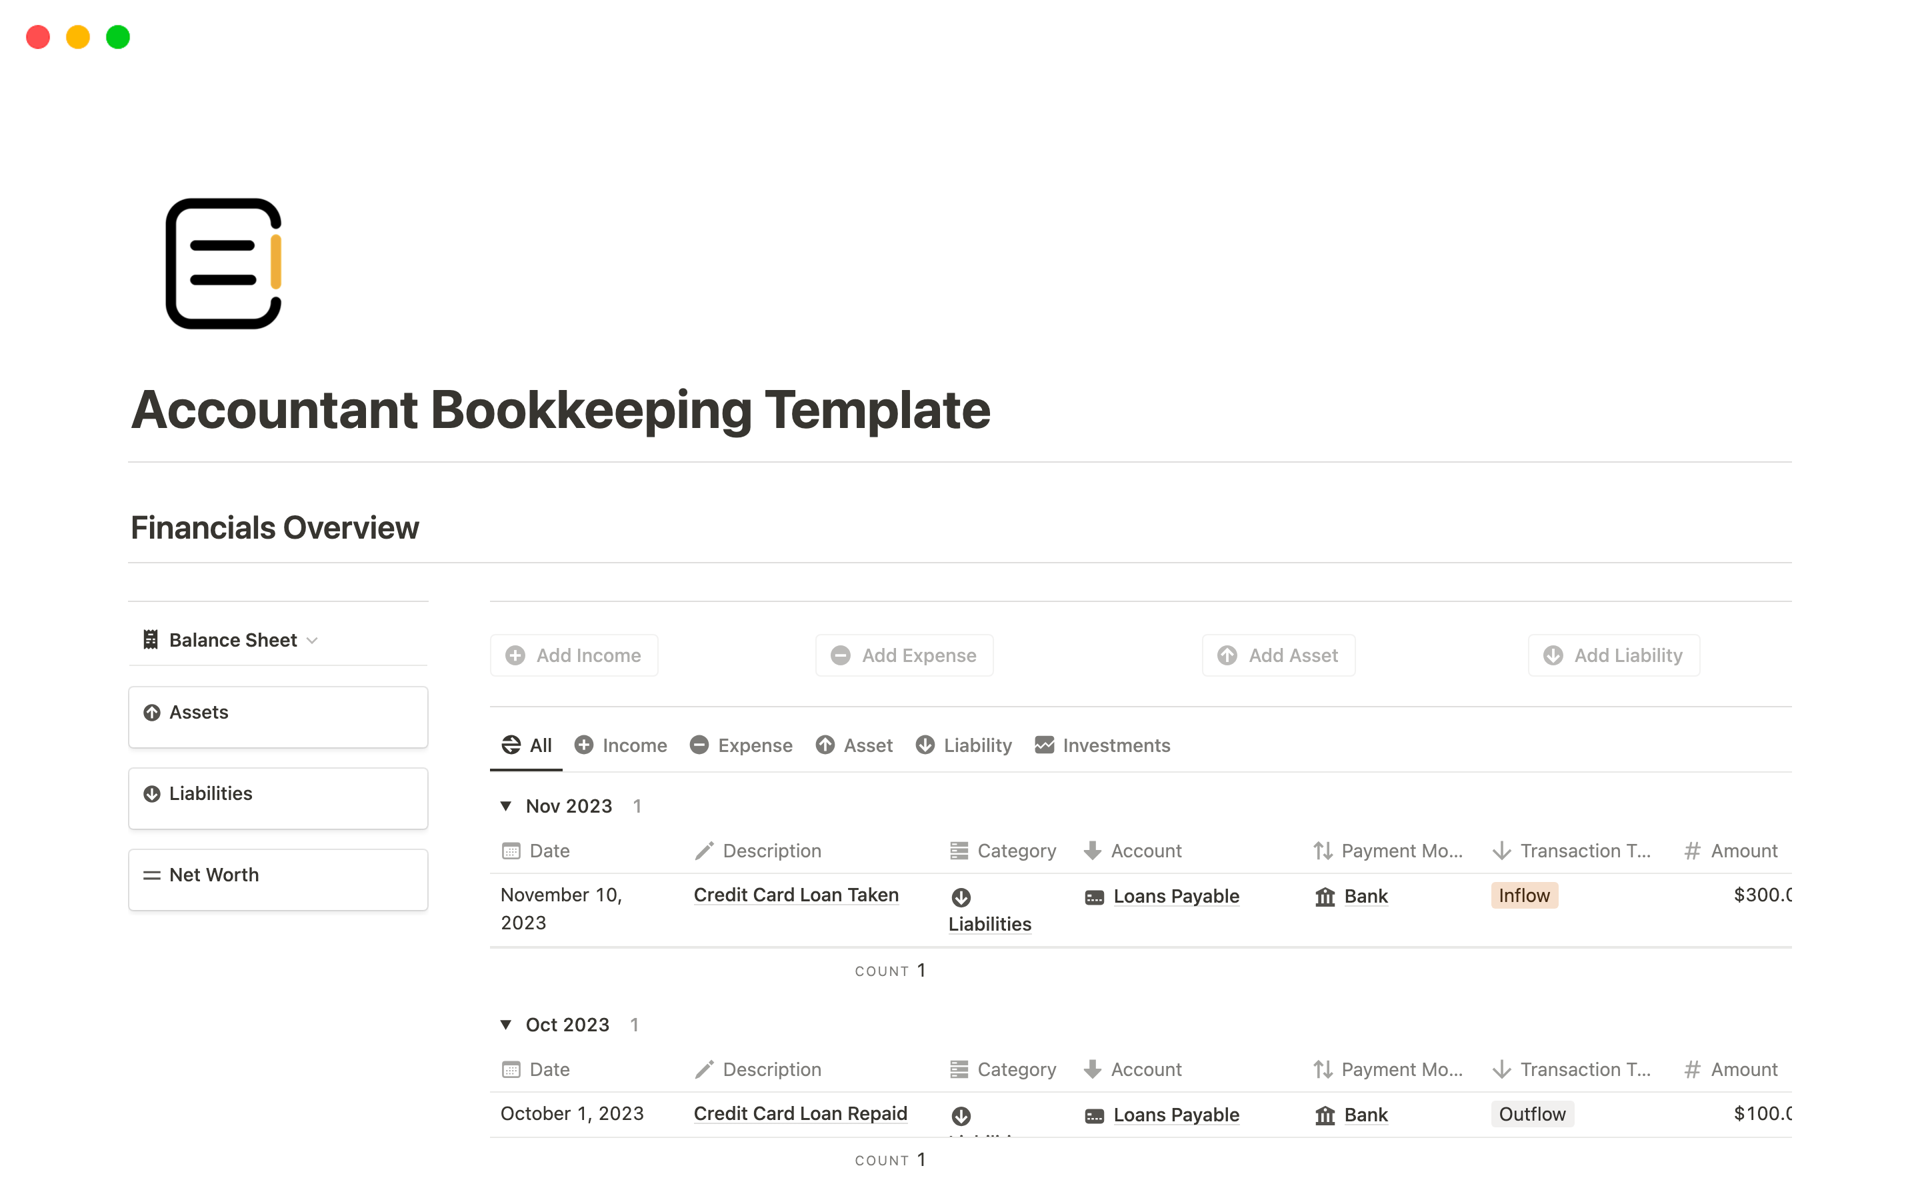 This bookkeeping template provides best solution for accountants to manage their business finances, produce income statement, balance sheet, cash flow statement and much more on a periodical basis.           